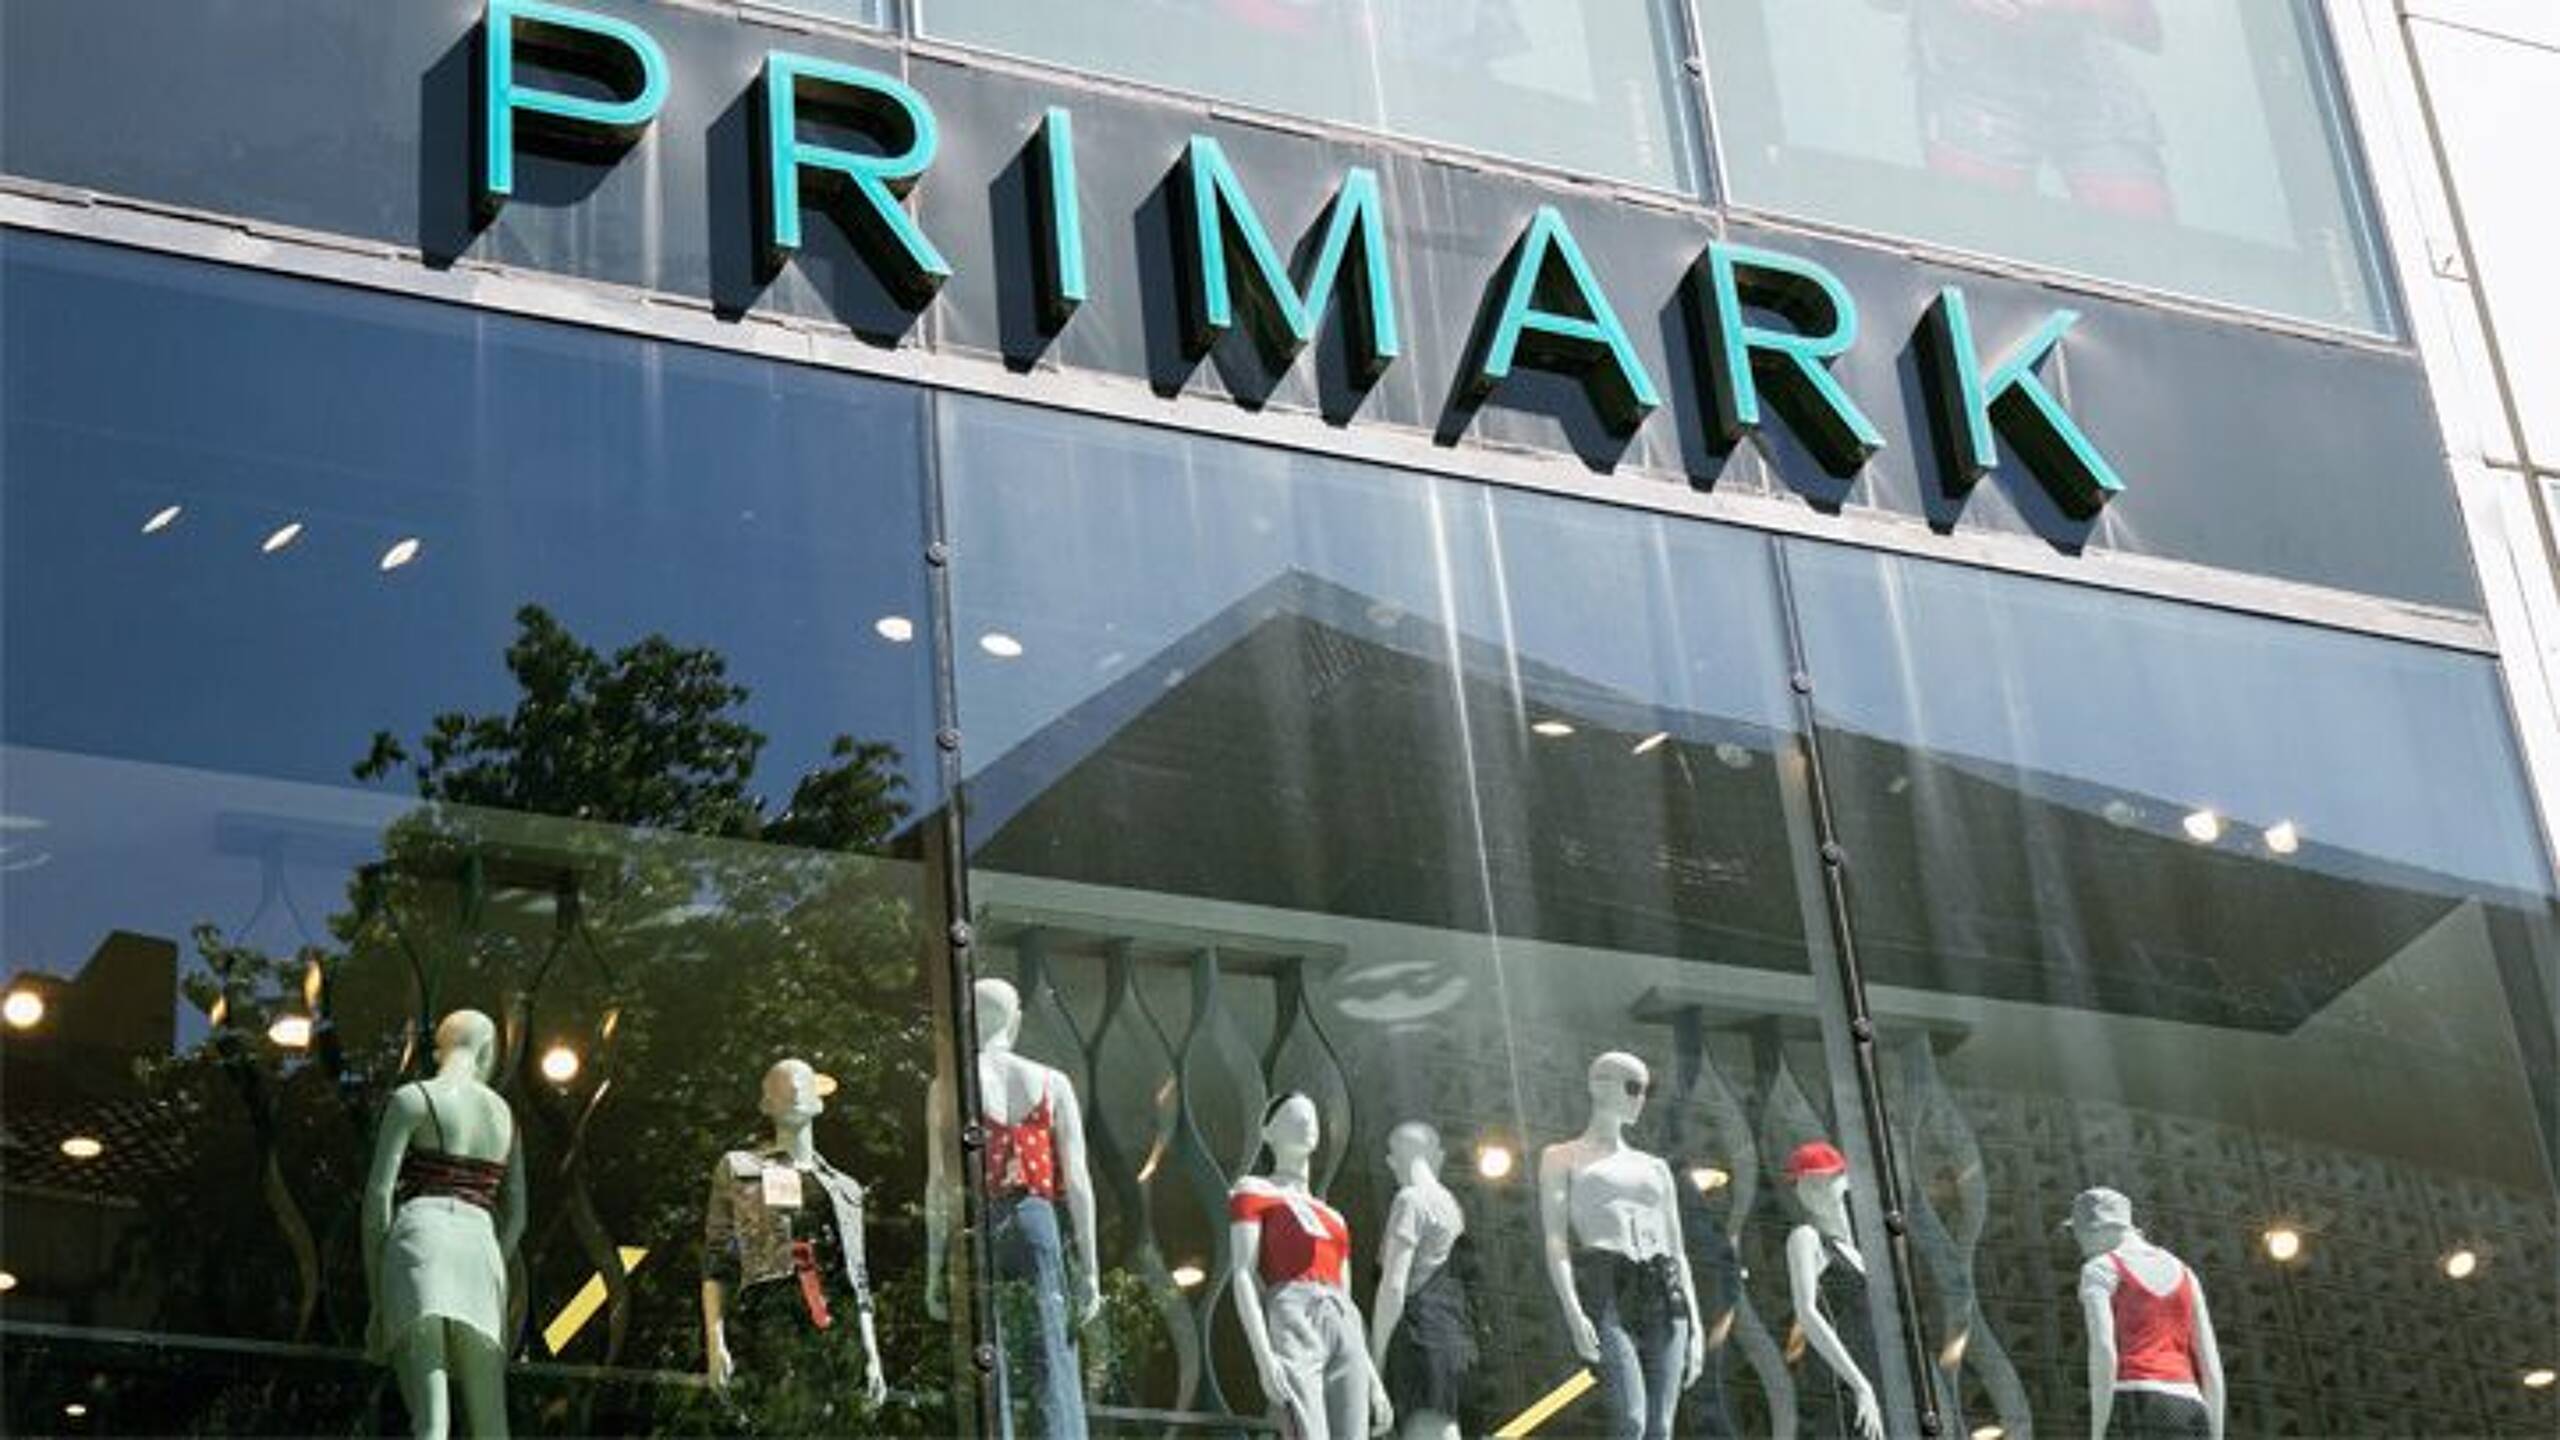 Primark tests new standard and initiatives to extend clothing durability